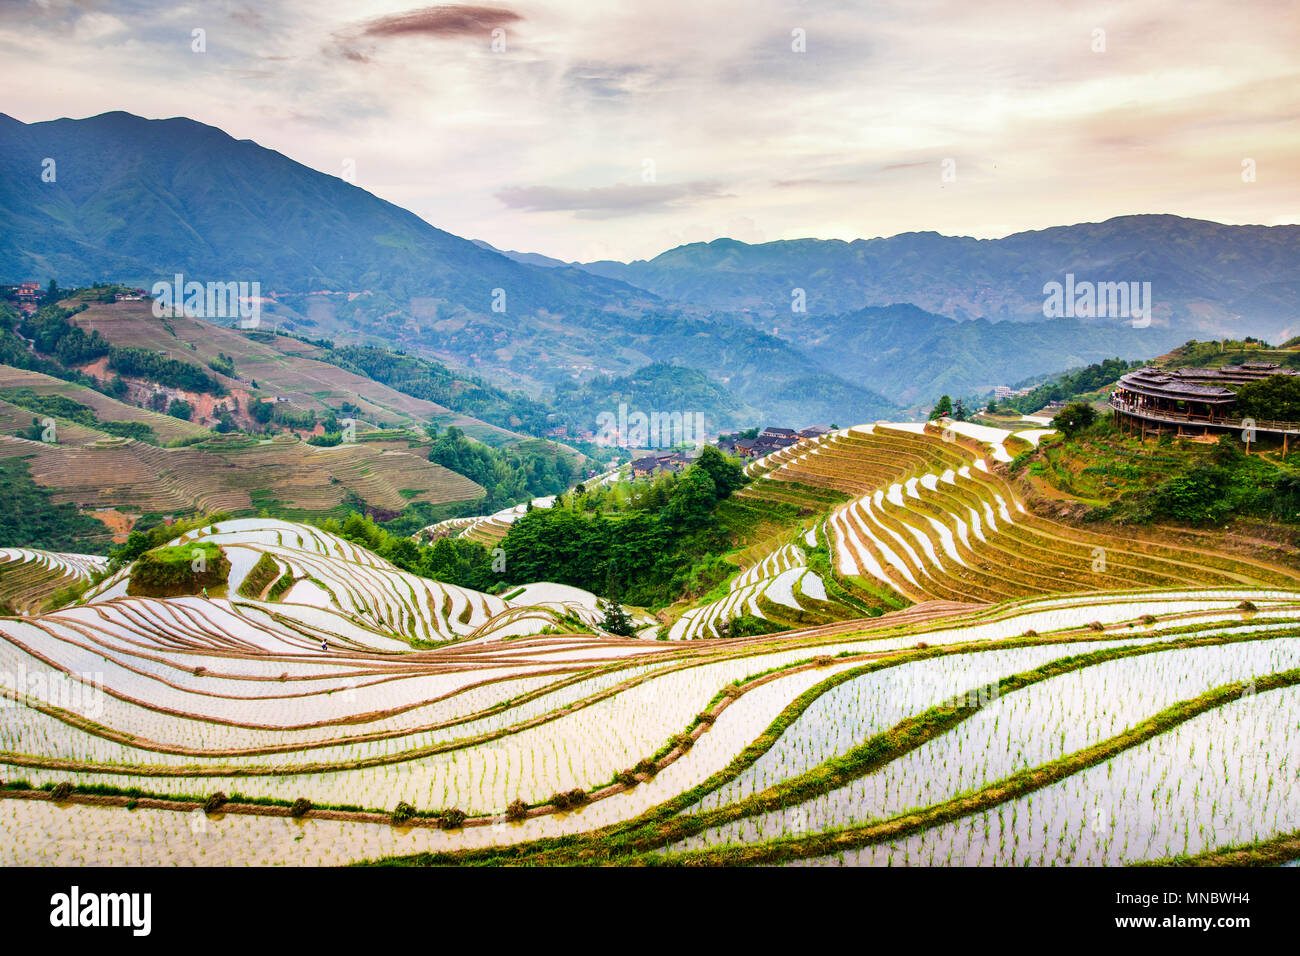 Asian rice terrace scenery at sunset in south of China Stock Photo